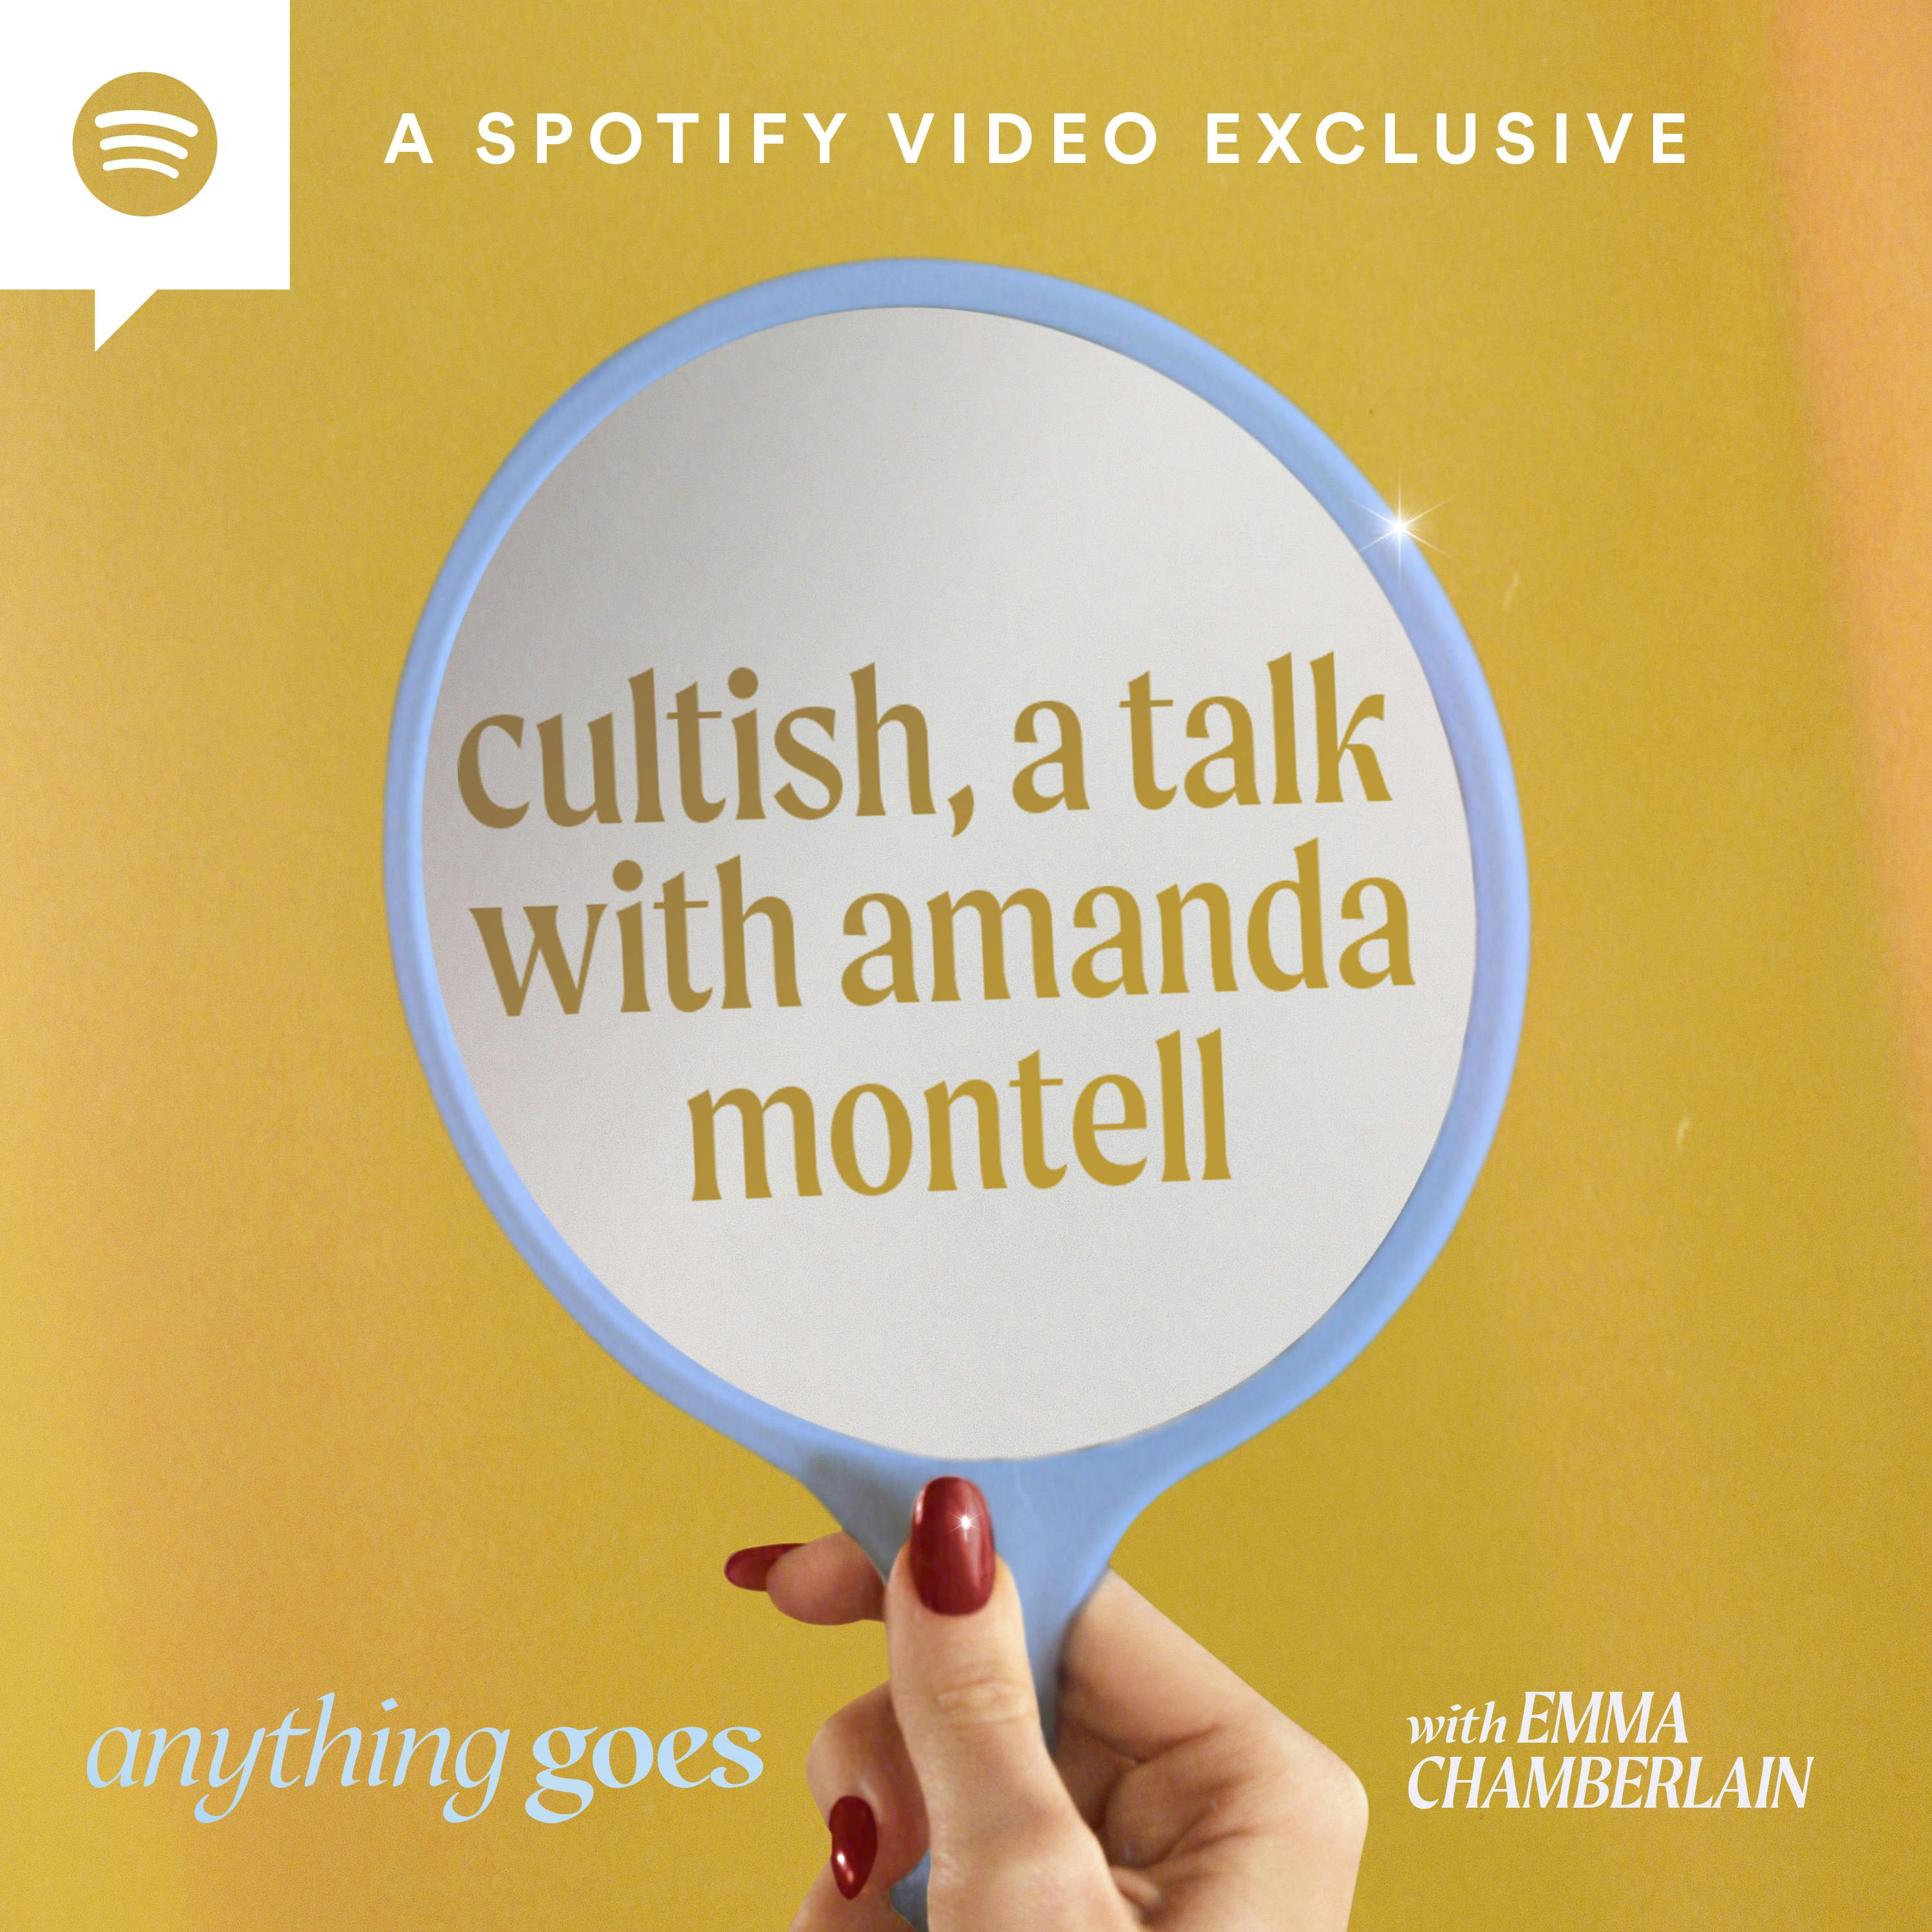 cultish, a talk with amanda montell [video]